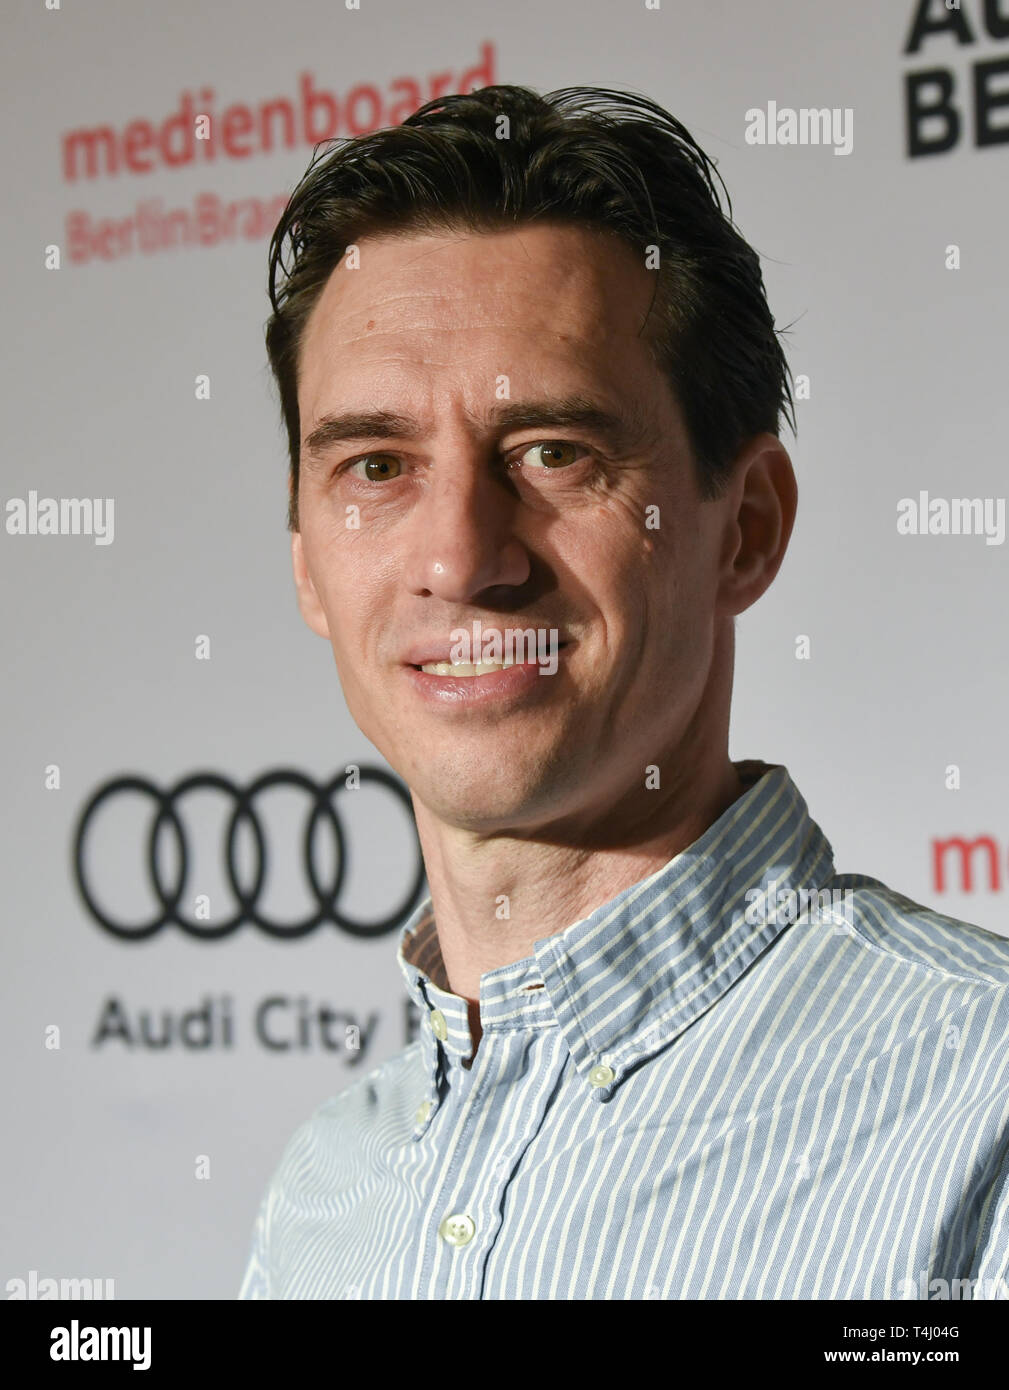 Berlin, Germany. 16th Apr, 2019. The actor Robert Glazeder comes to the premiere of the film 'Wenn Fliegen träumen' at the film festival 'Achtung Berlin' in the cinema Babylon. The road movie is the directing debut of Katharina Wackernagel. Credit: Jens Kalaene/dpa-Zentralbild/ZB/dpa/Alamy Live News Stock Photo